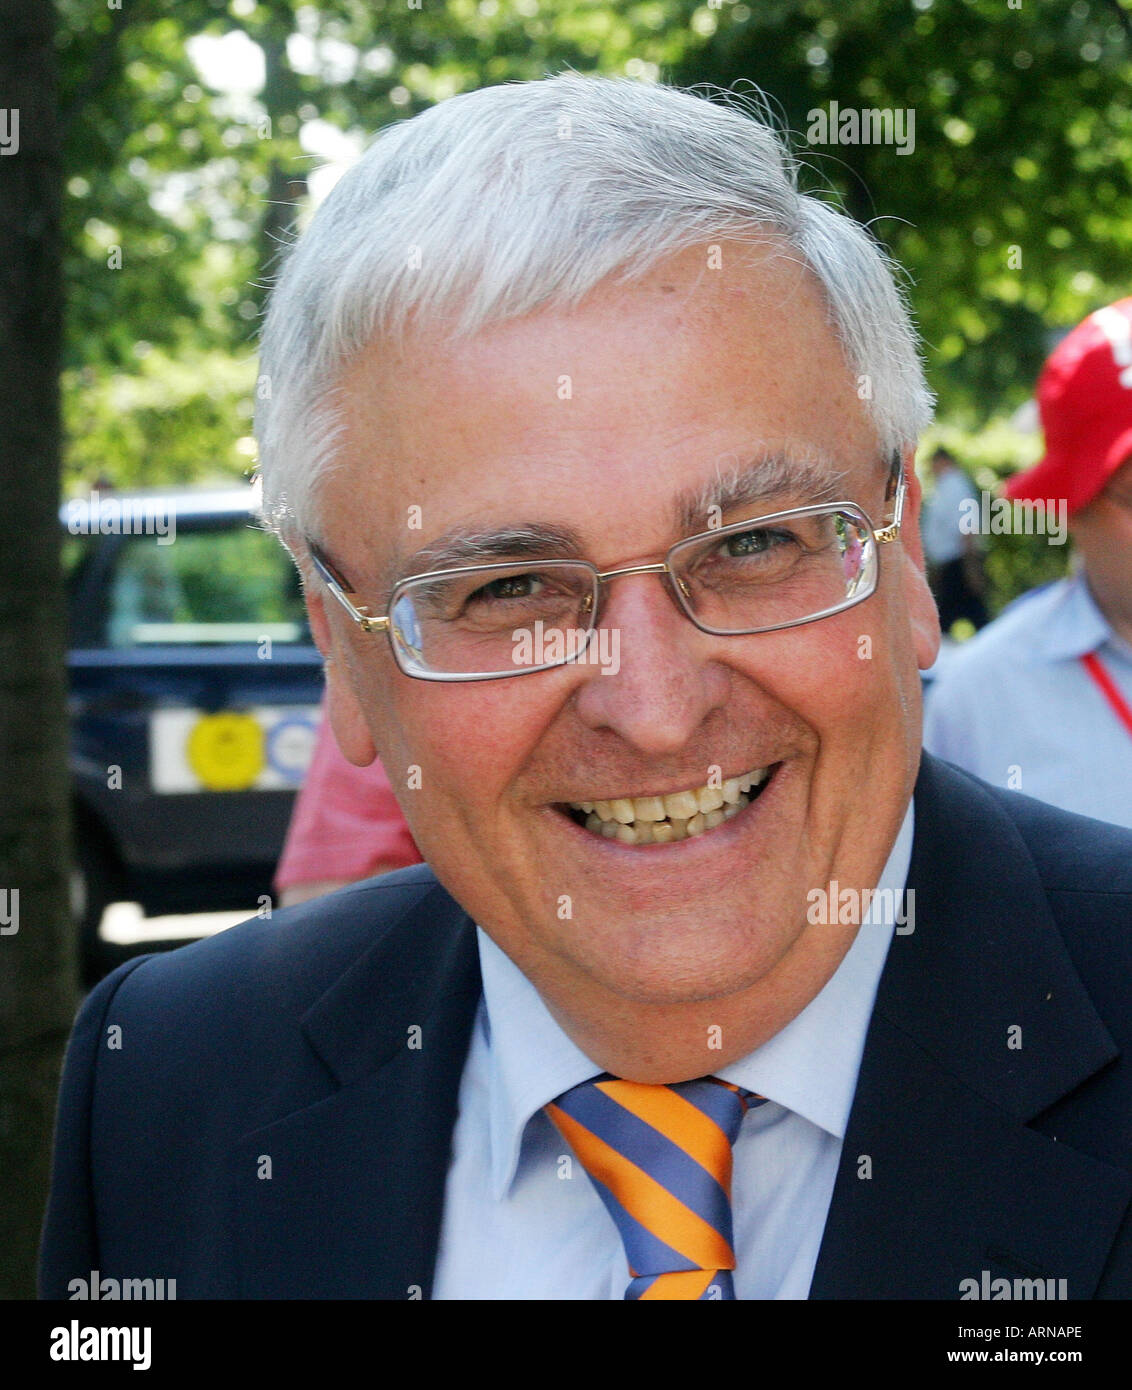 President of the German Football Association Dr. Theo Zwanziger Stock Photo